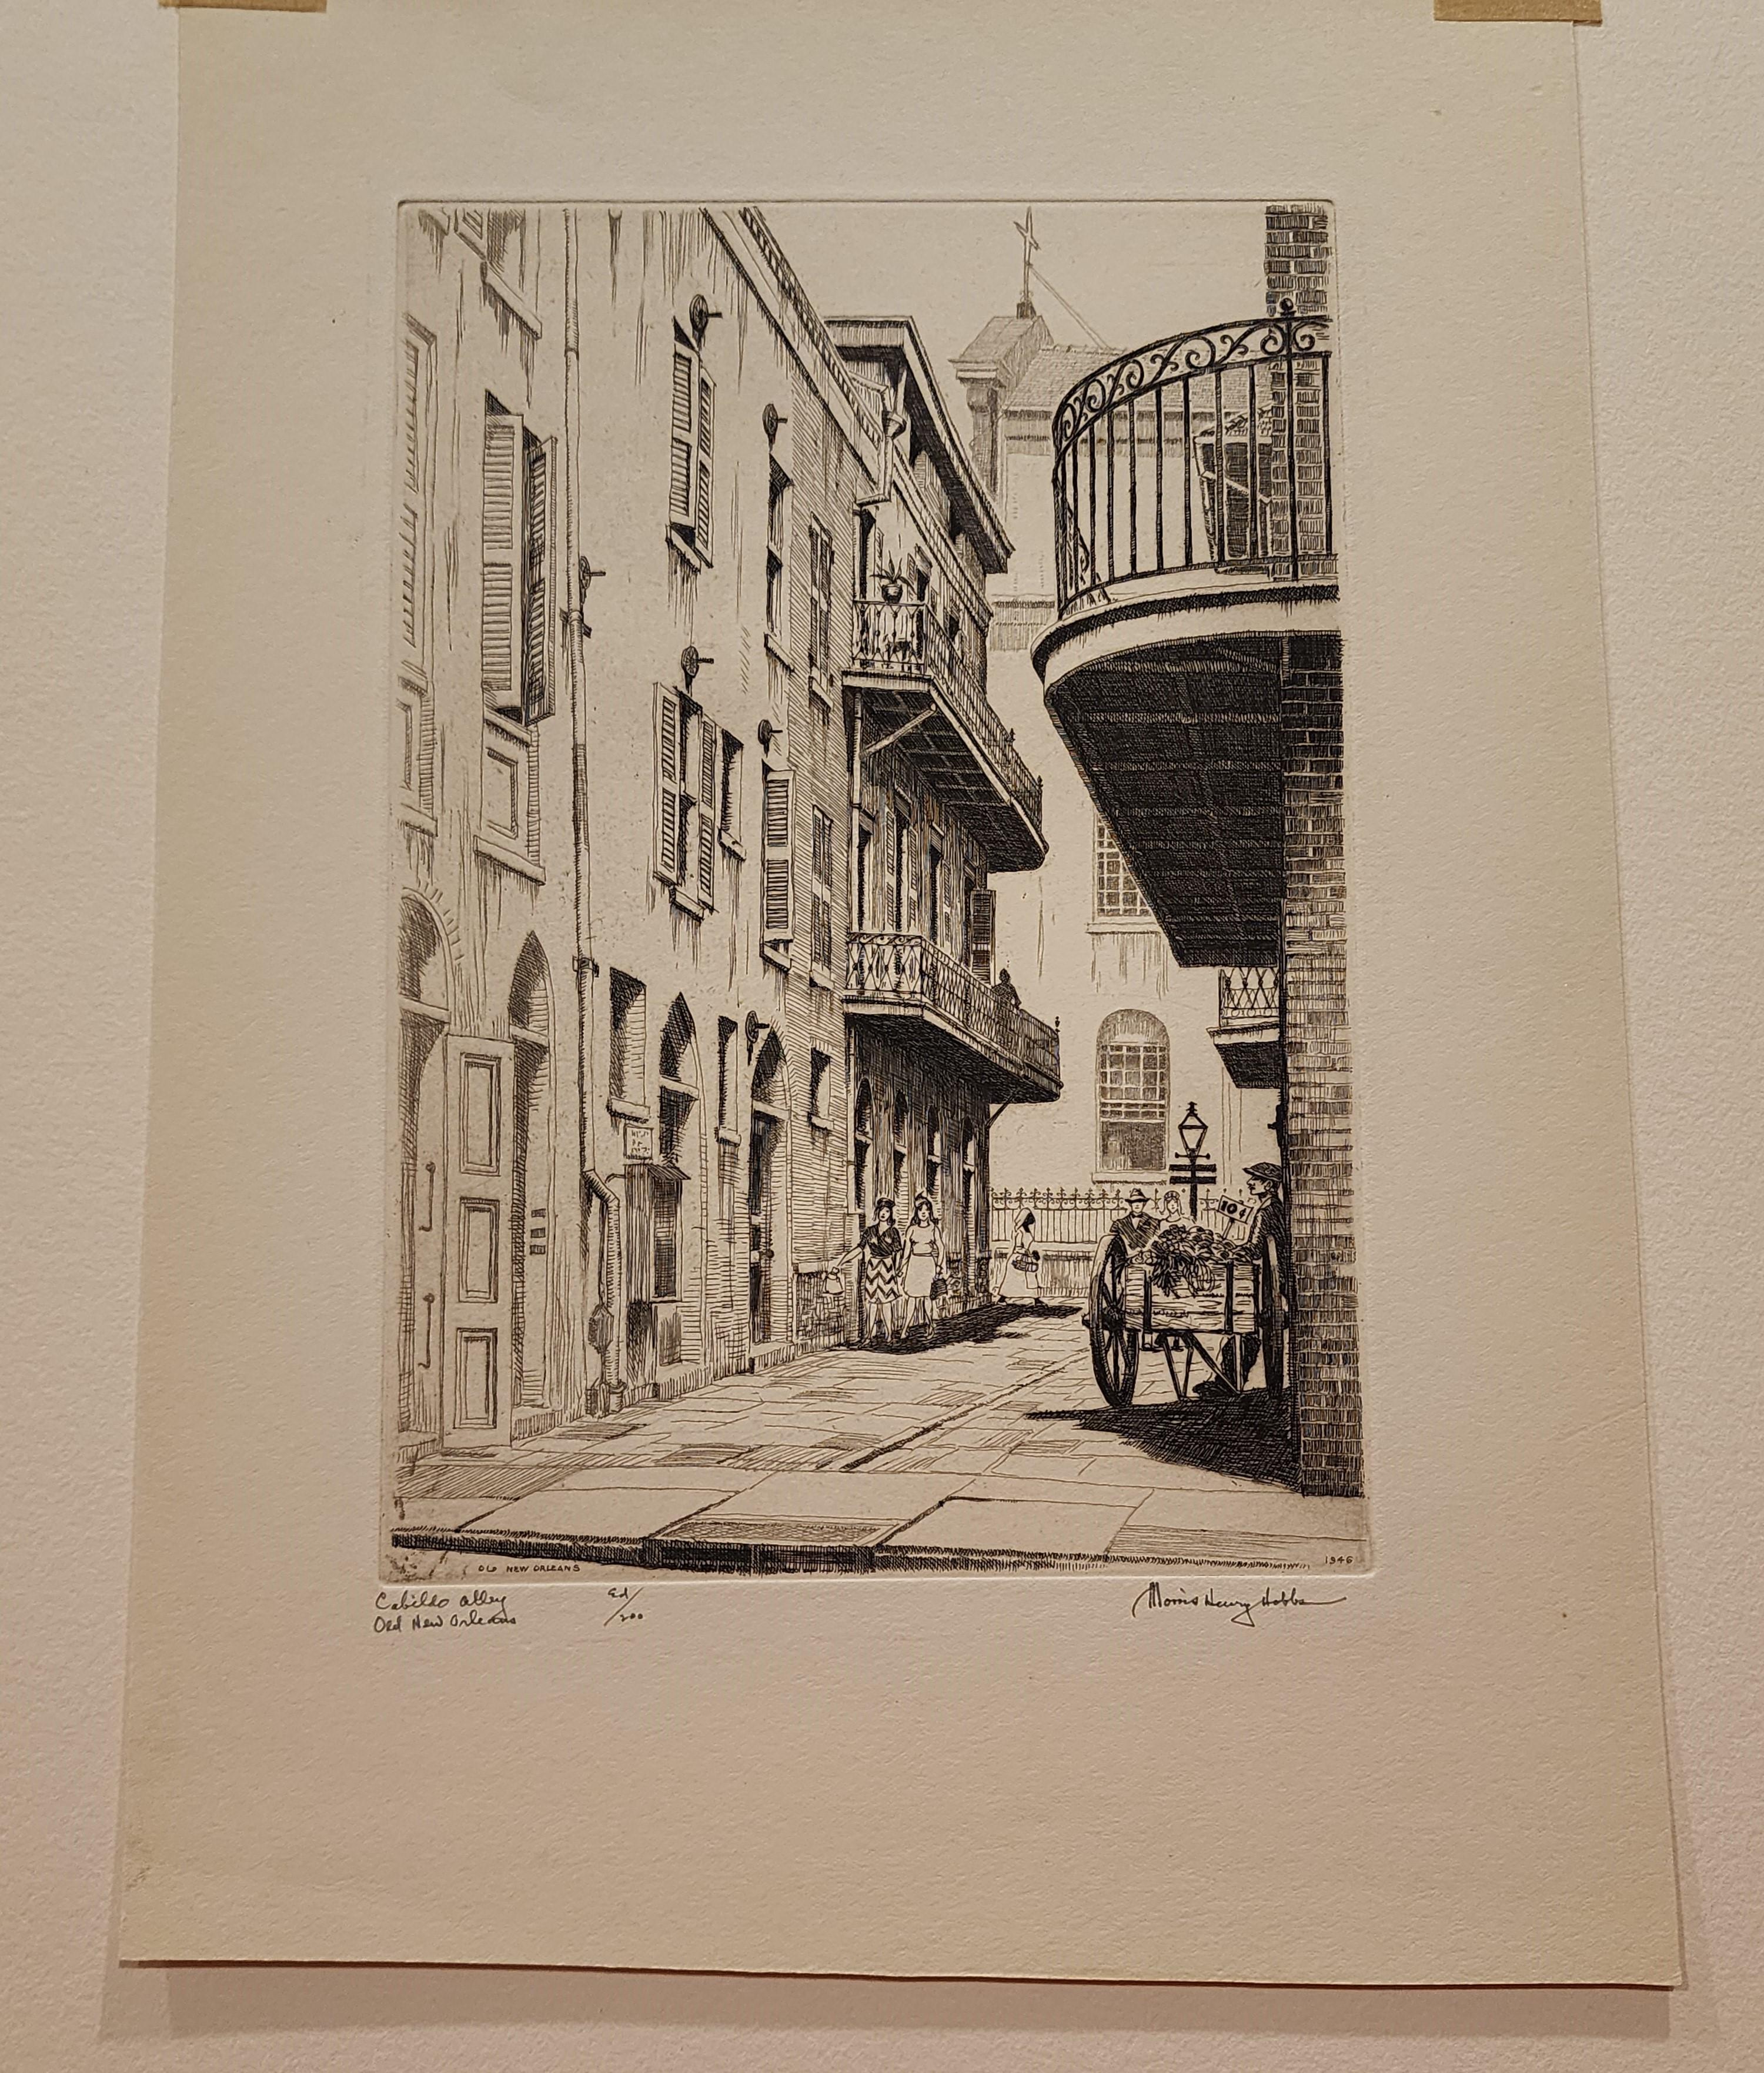 Cabilio Alley, Old New Orleans - American Realist Print by Morris Henry Hobbs